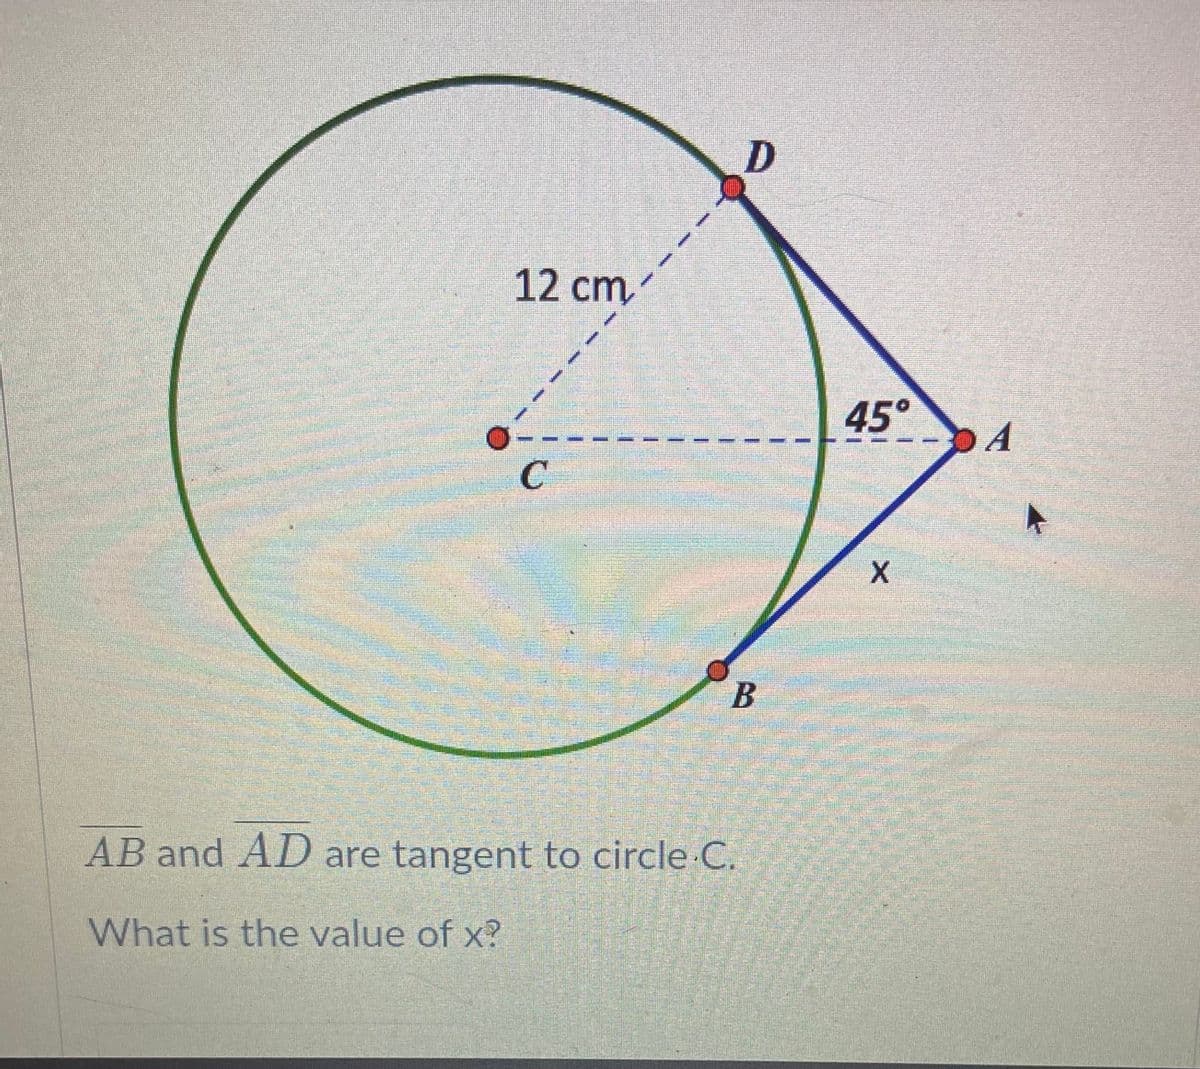 12 cm
45°
C
X.
В
AB and AD are tangent to circle C.
What is the value of x?
